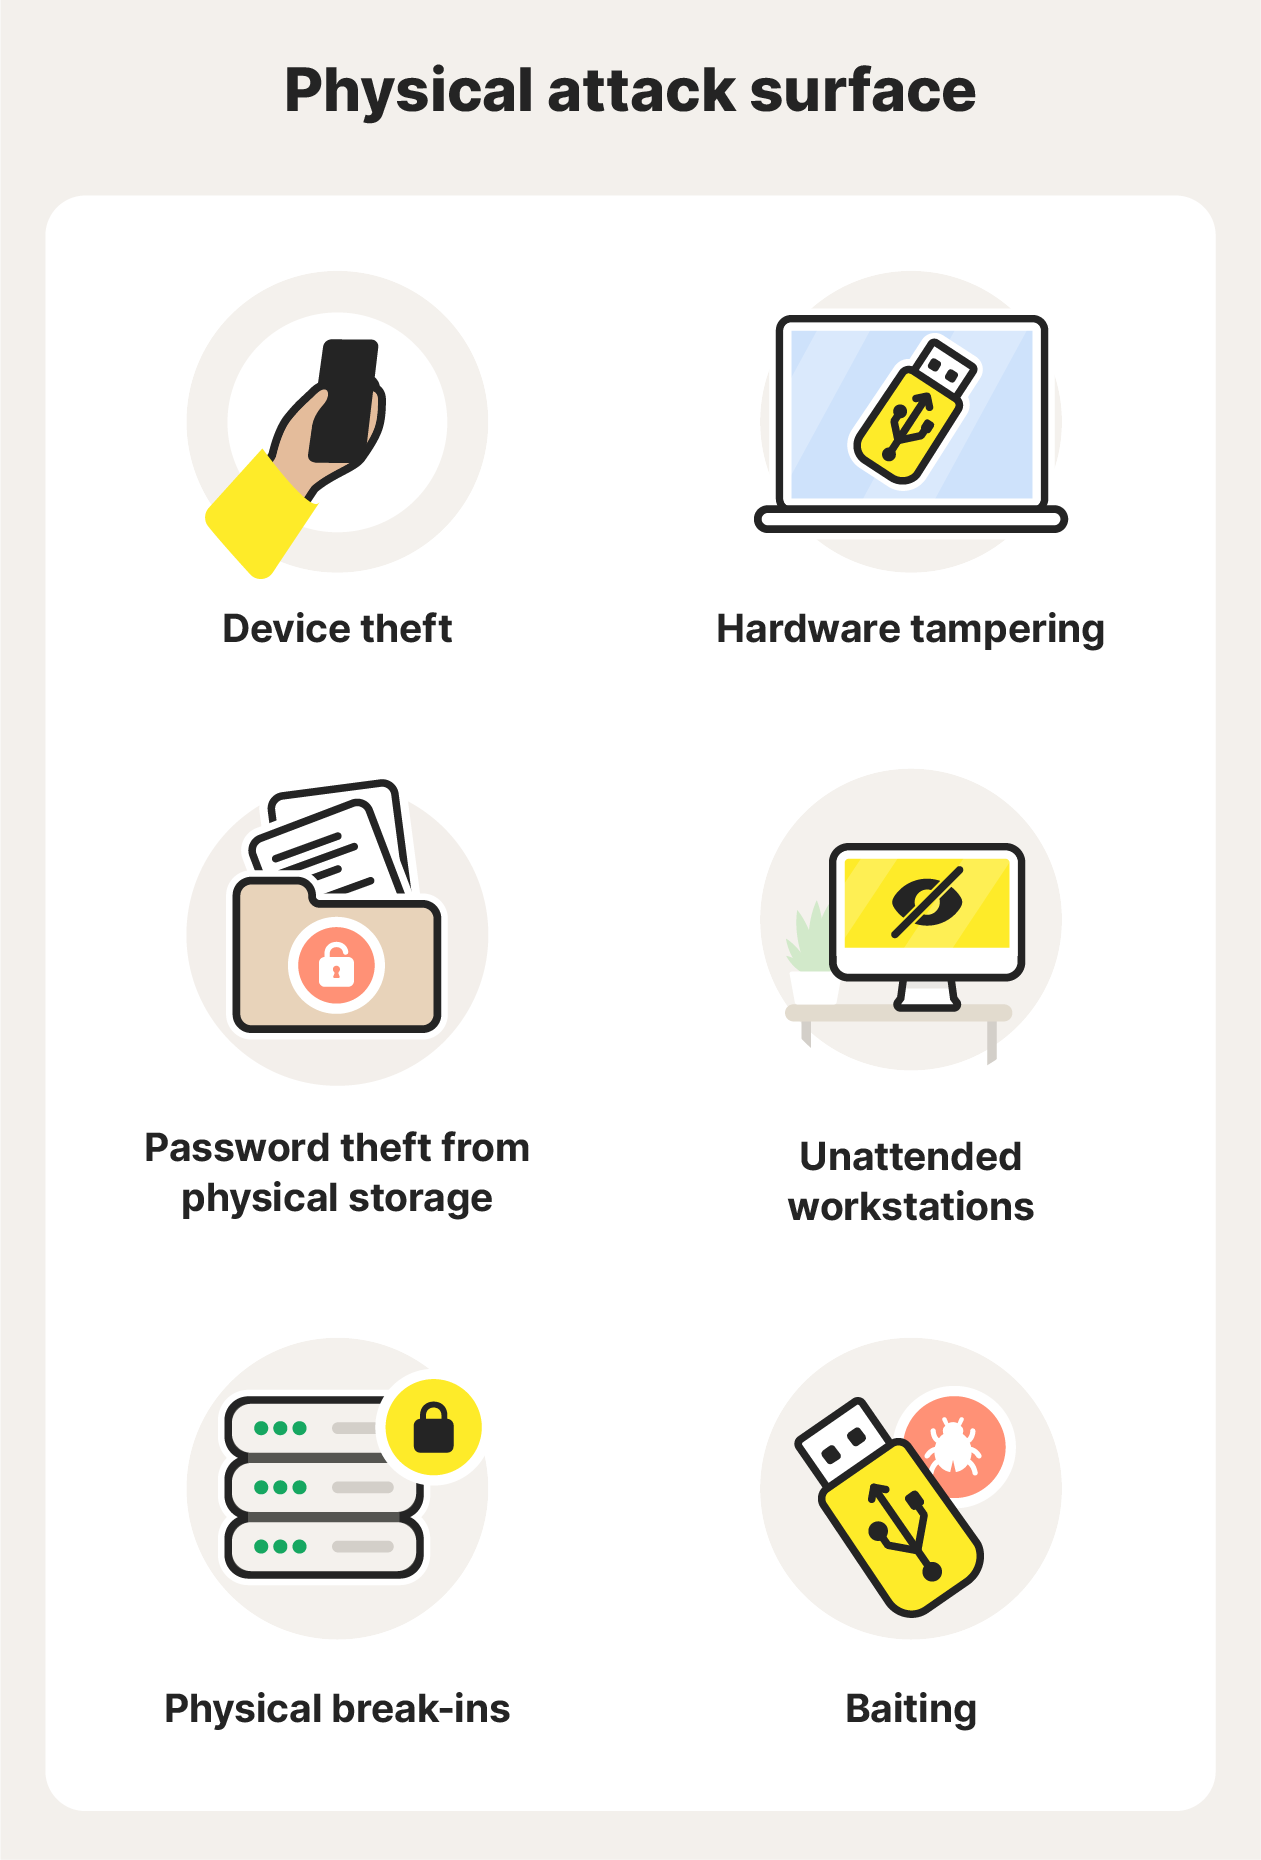 A physical attack surface can include device theft, hardware tampering, password theft from physical storage, unattended workstations, physical break-ins, and baiting. 